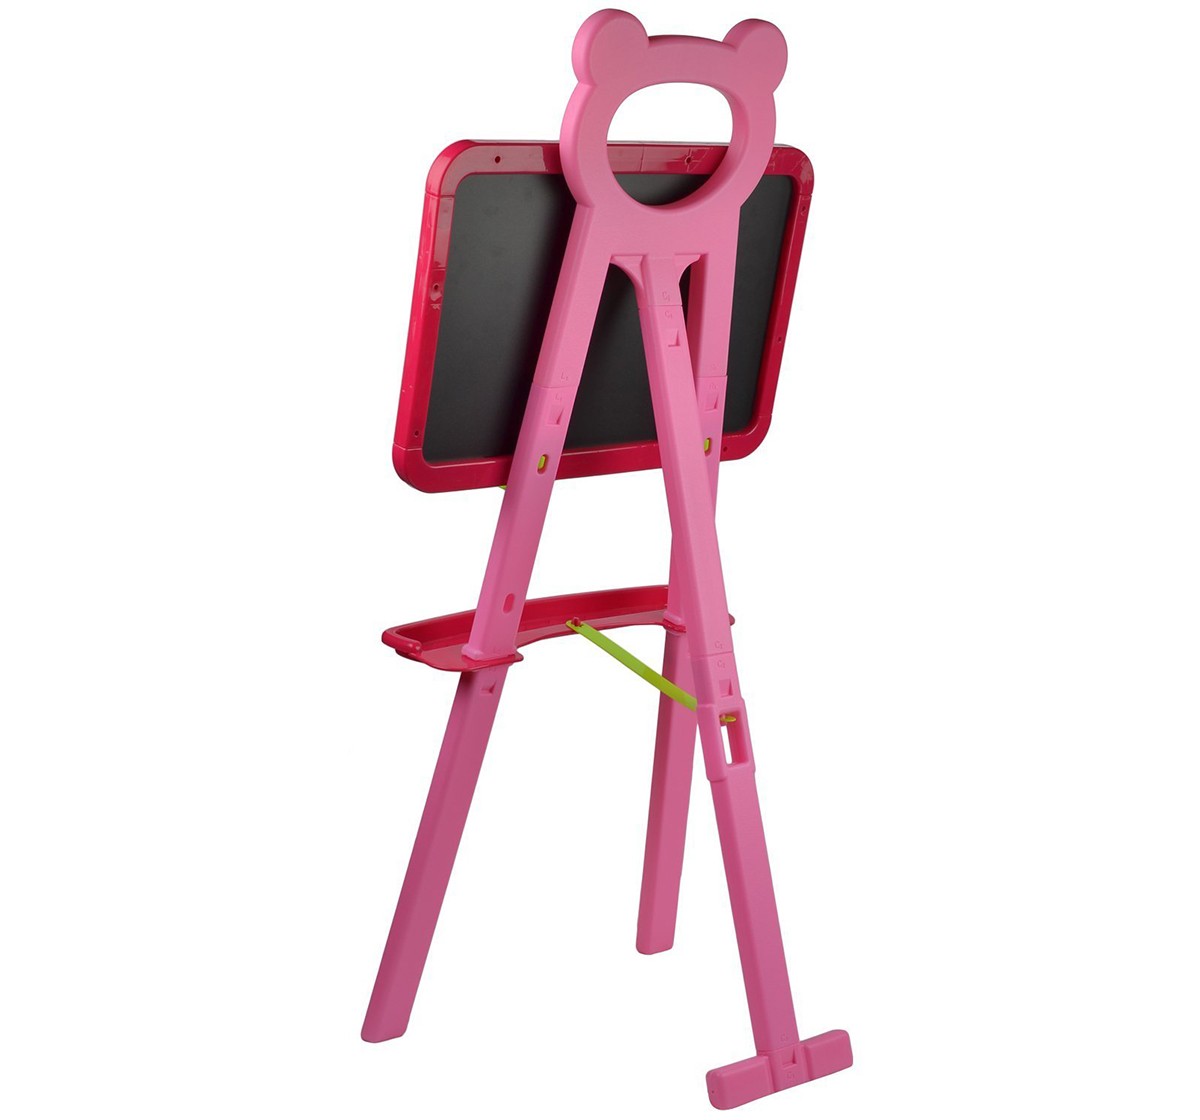 Comdaq Easel with Magnetic Letters Activity Set for age 3Y+ (Pink)